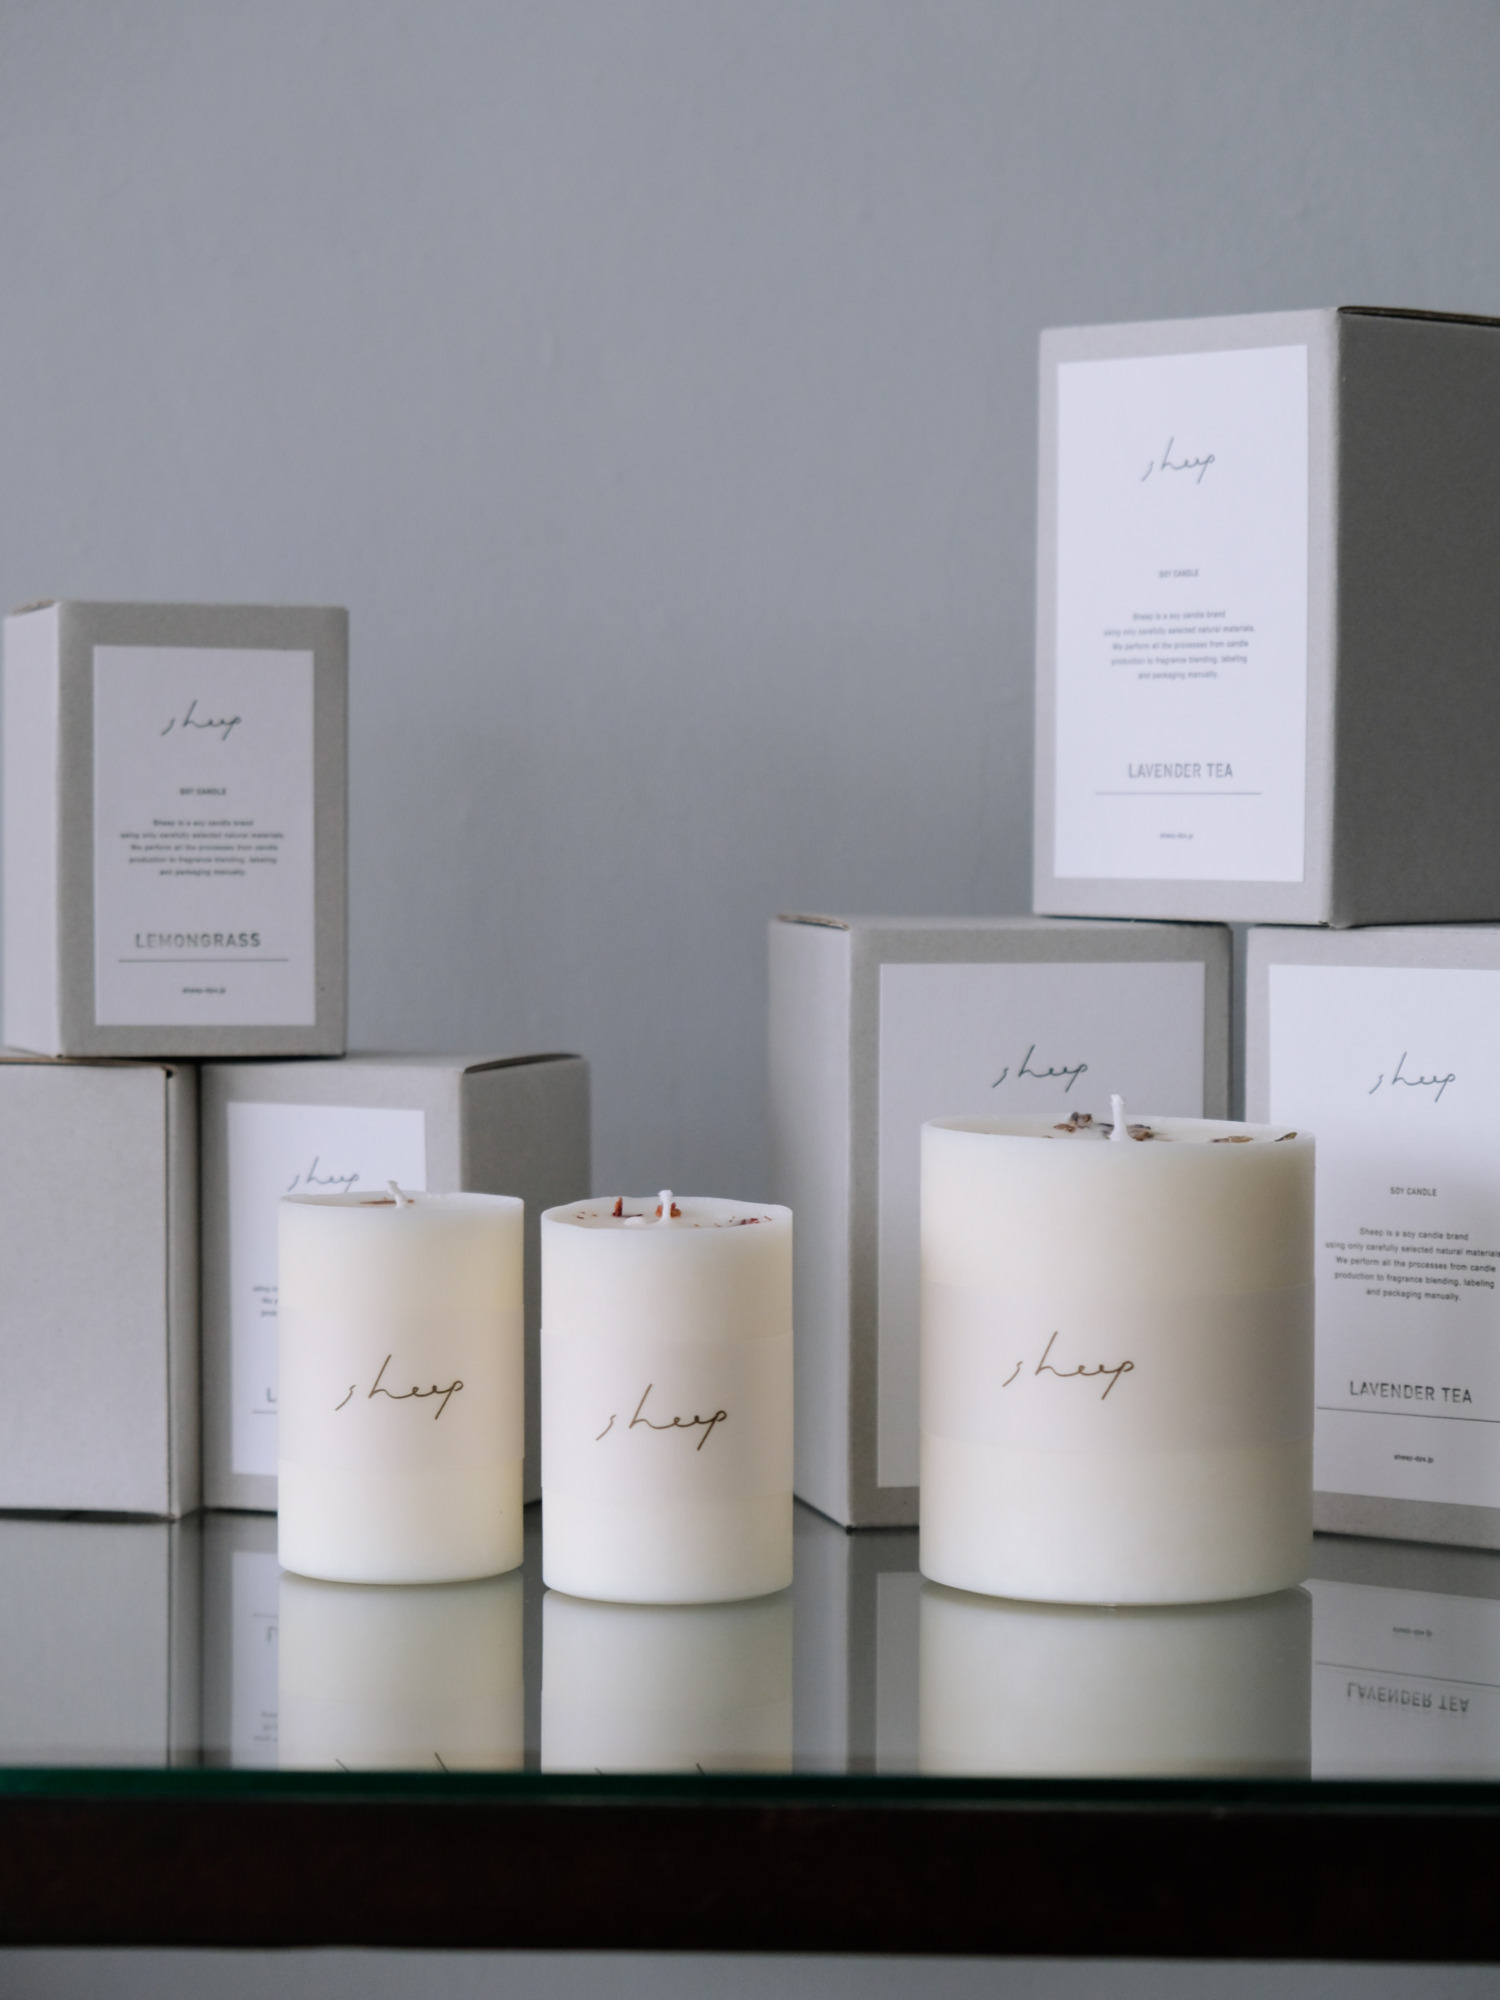 SOY CANDLE / LEMMONGRASS SS